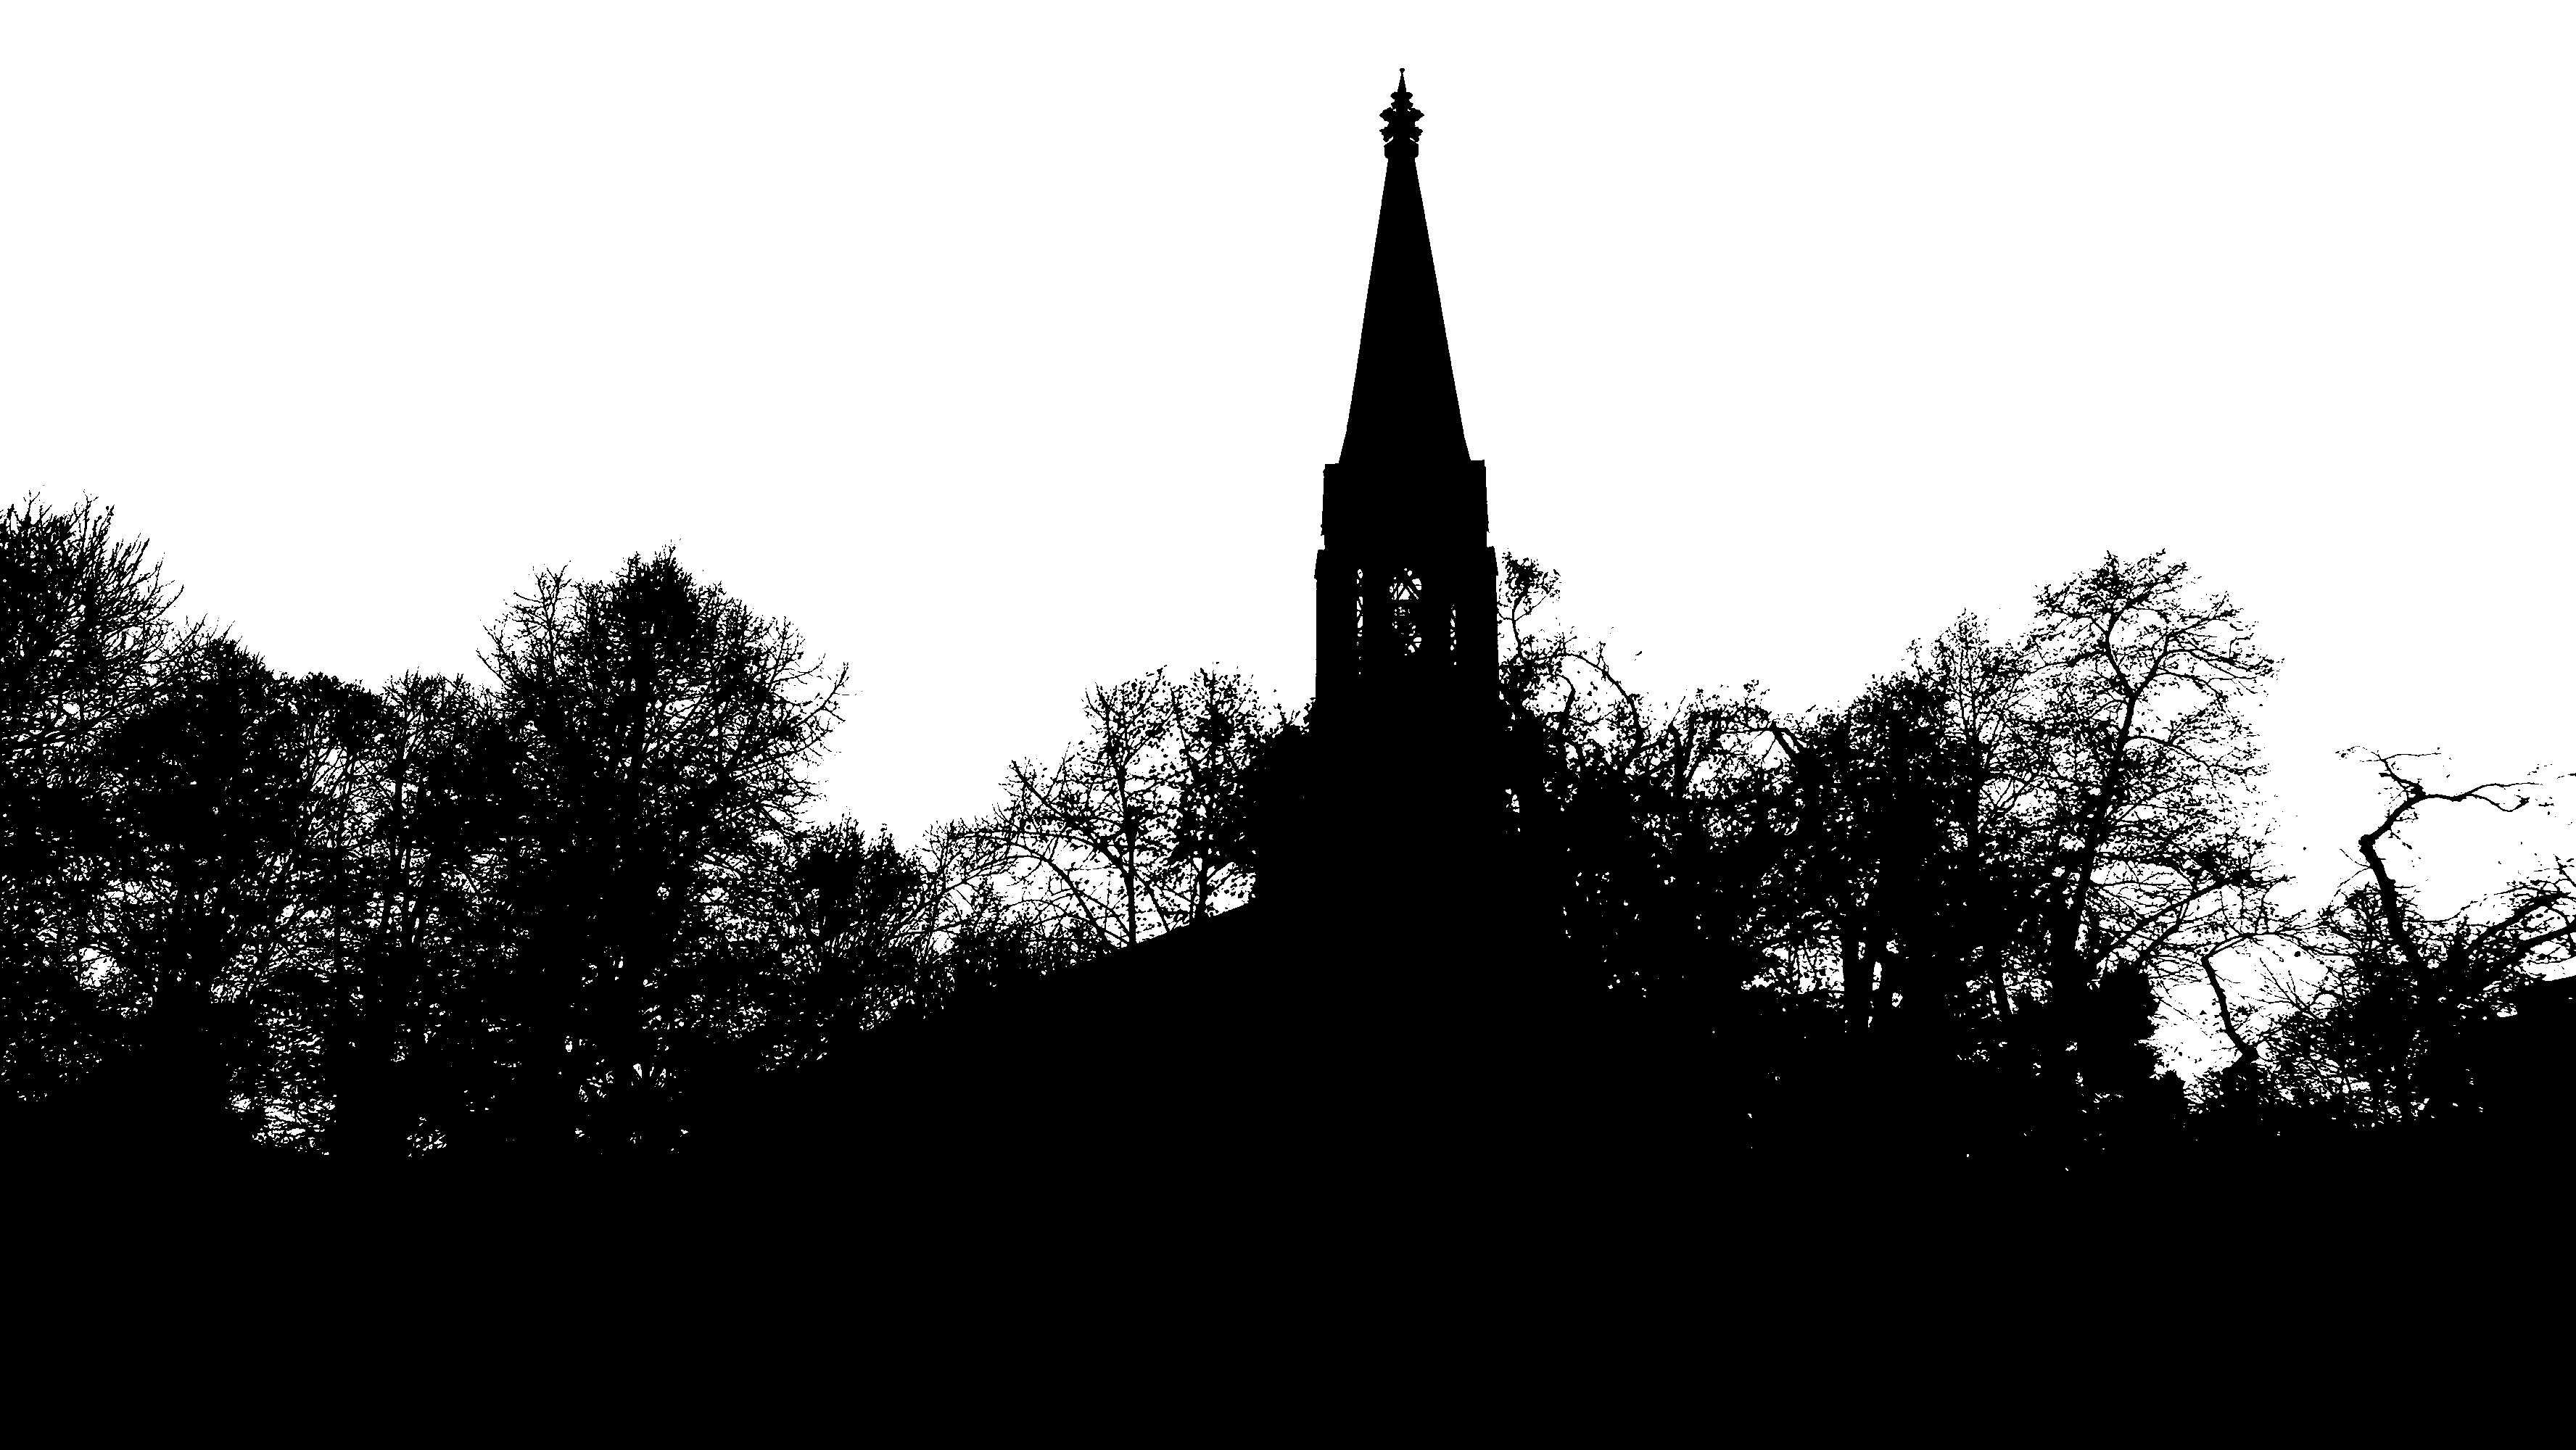 Black And White Church And Trees Silhouette by qubodup on Clipart library